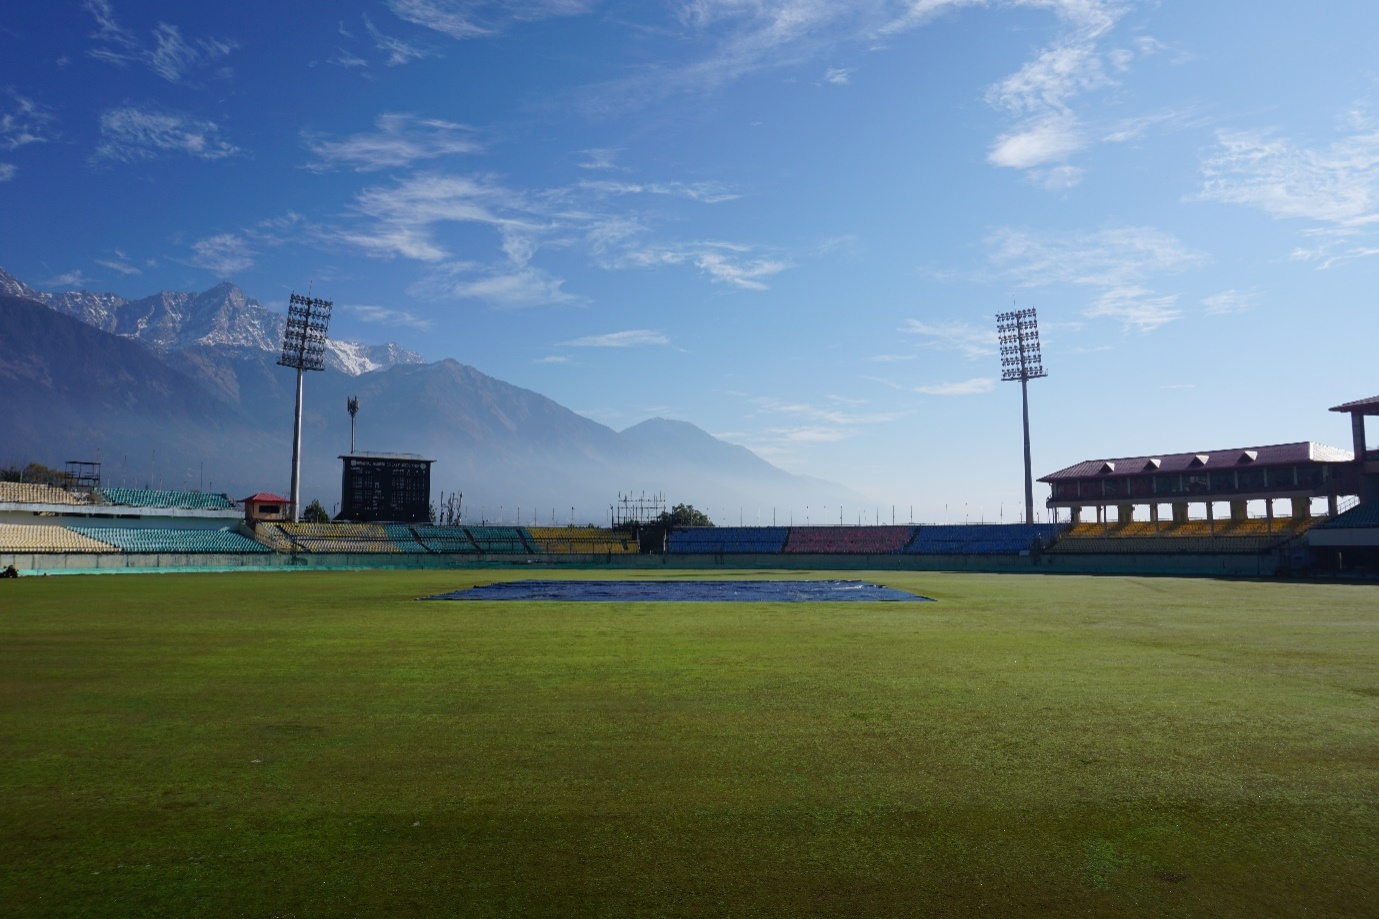 A cricket ground during the day.